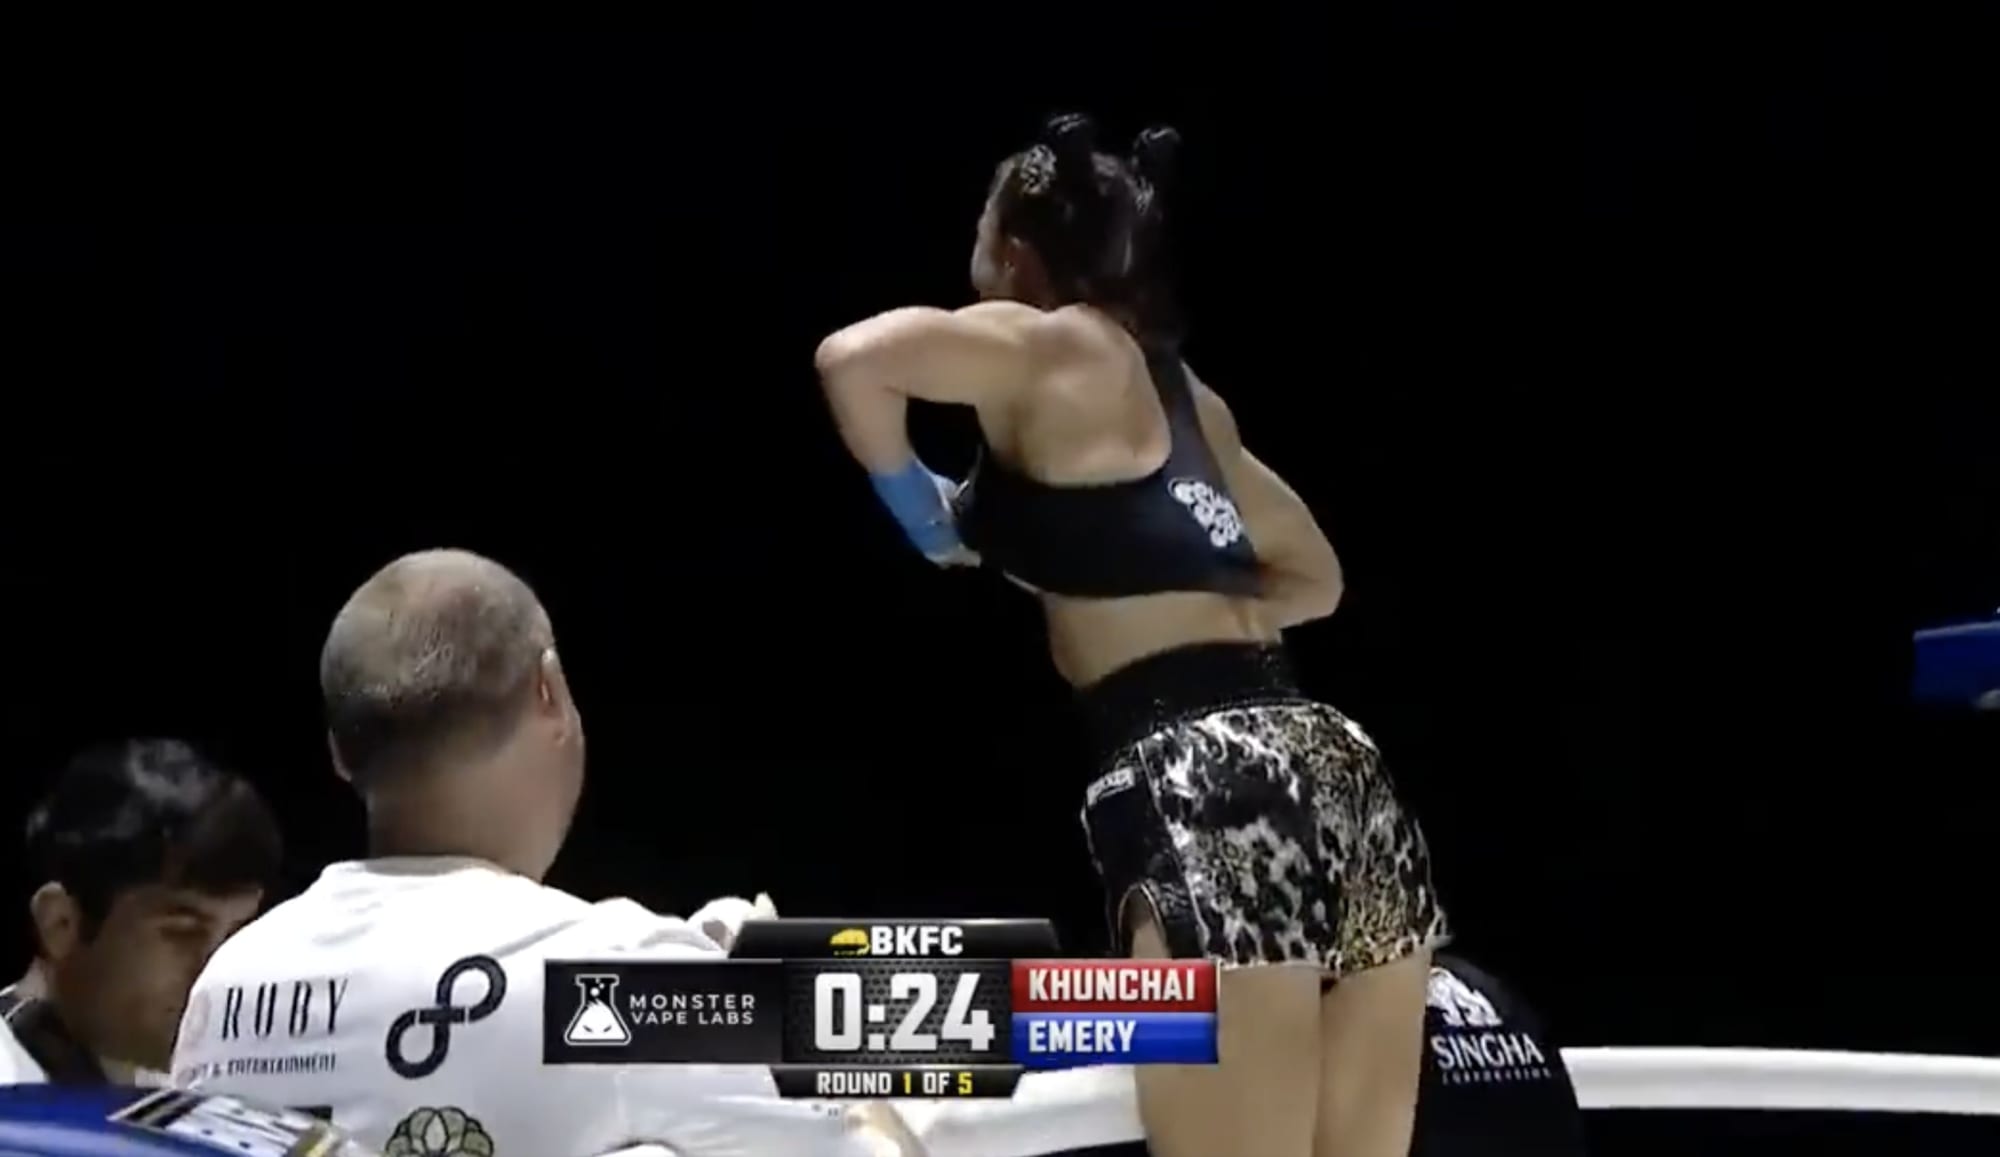 BKFC fighter flashes the crowd her breasts after KO (Video)